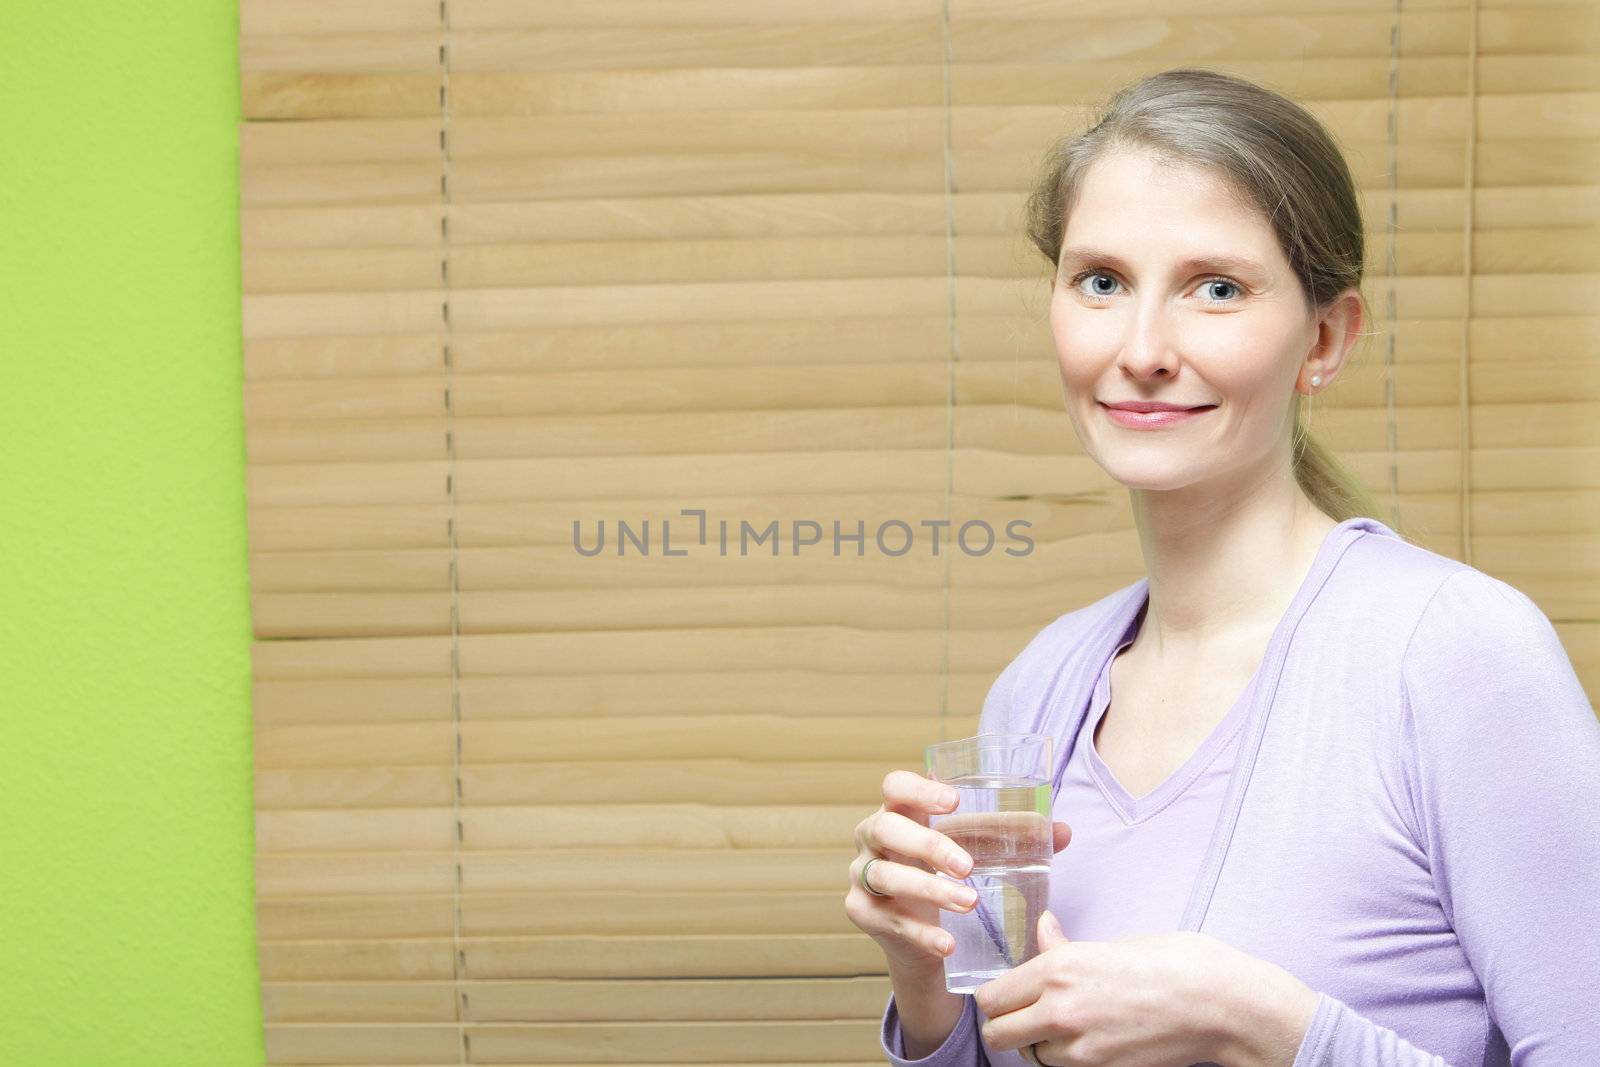 A young attractive woman holding a glass of water against wooden blinds.